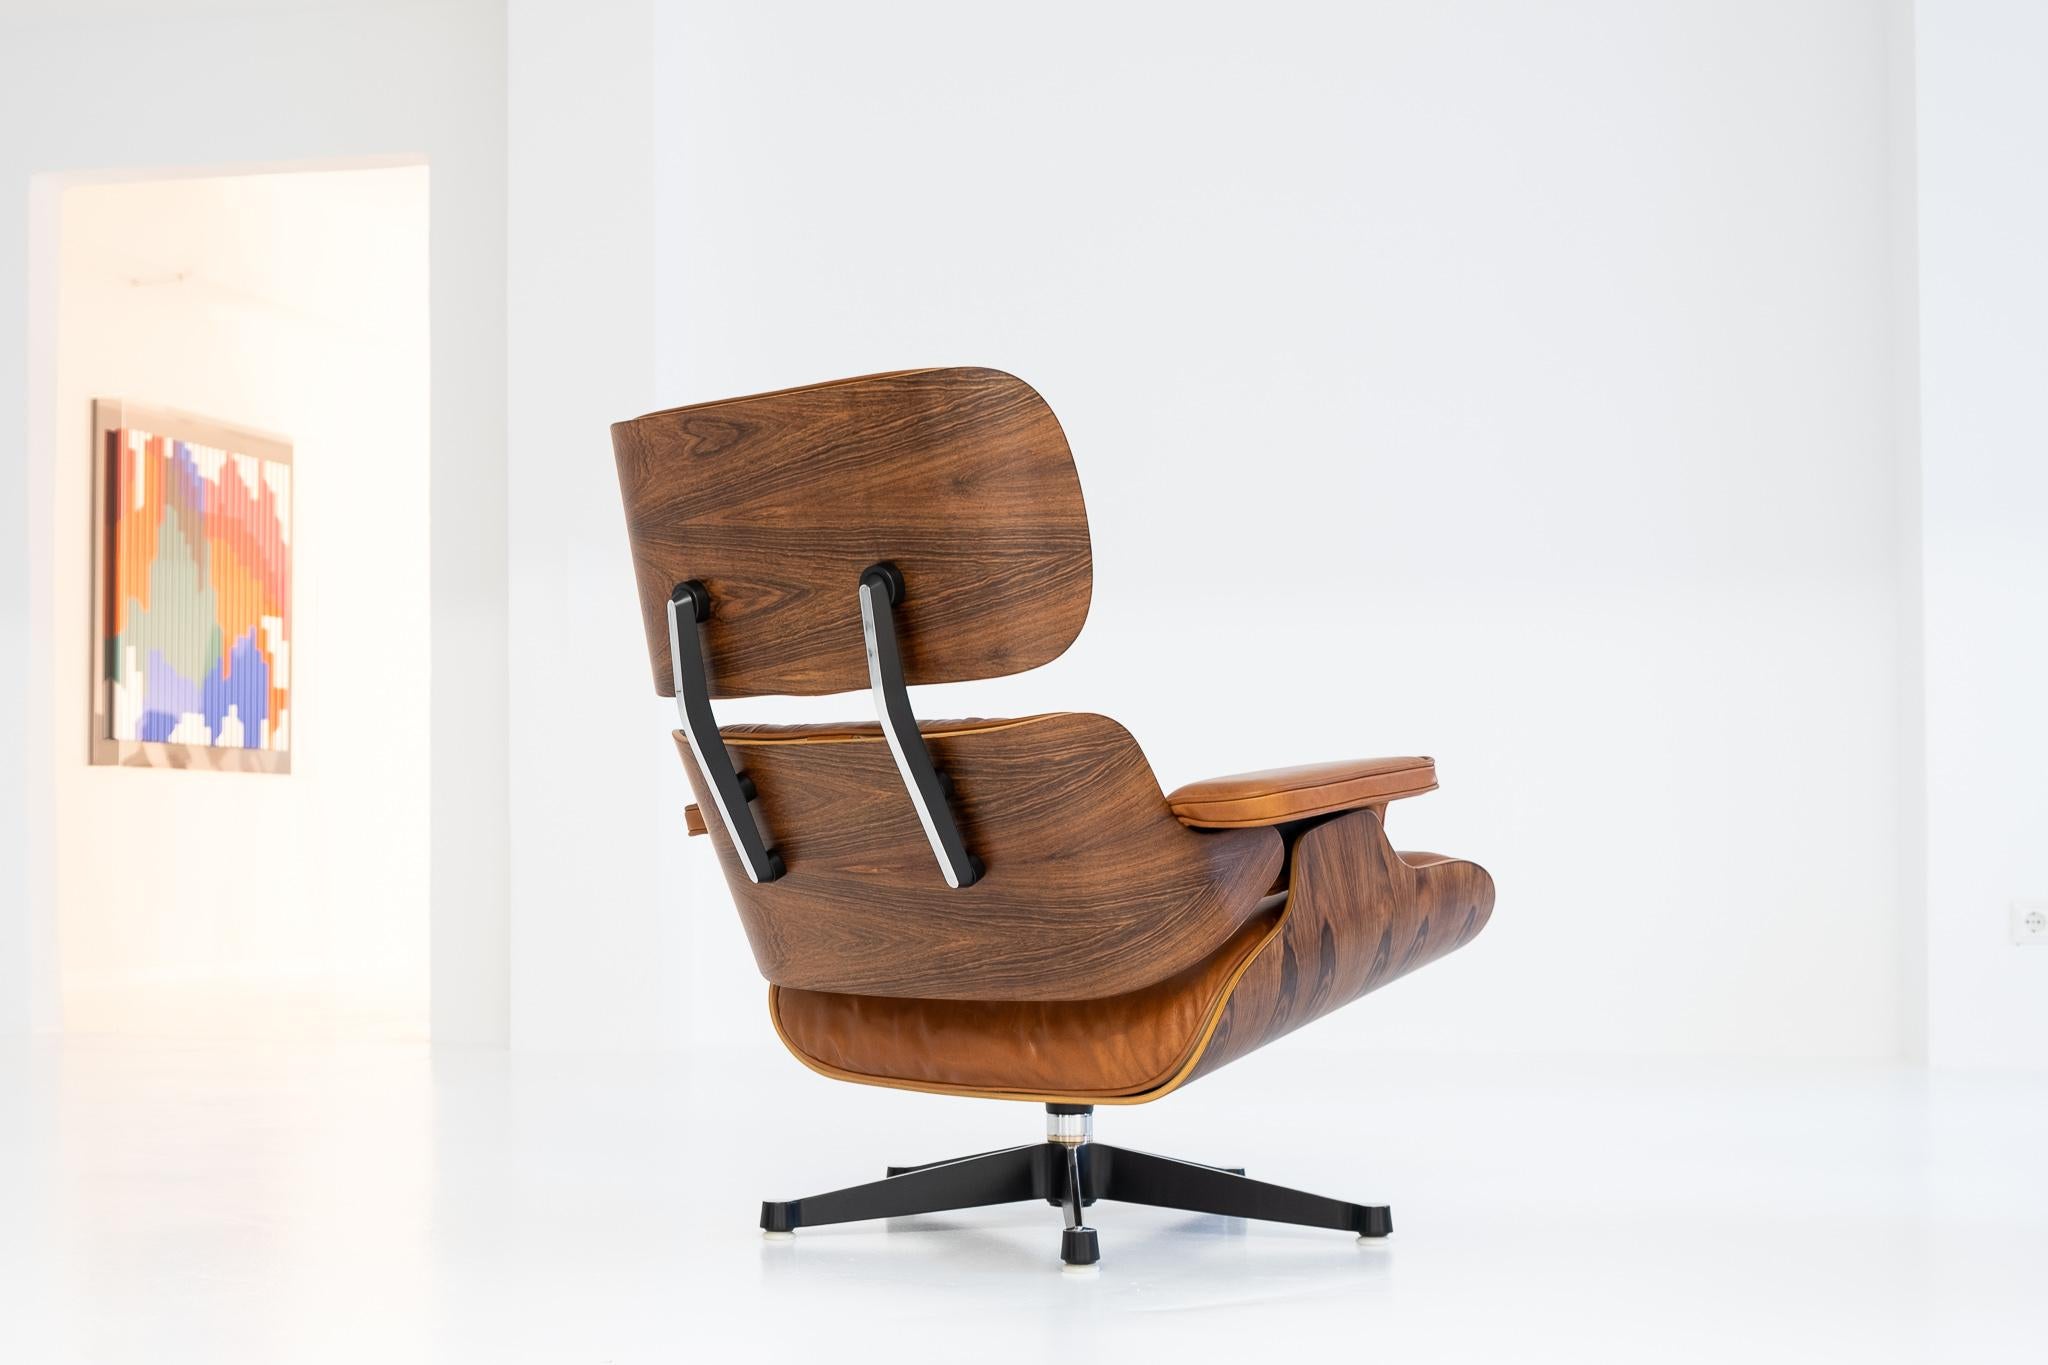 Eames Lounge Chair, Brazilian rosewood veneer (CITES available), covered with super soft cognac-colored leather. Fully restored and documented by our Vitra-certificated restorer. Restoration incl. veneer, cushions, shockmounts and rotating parts. We